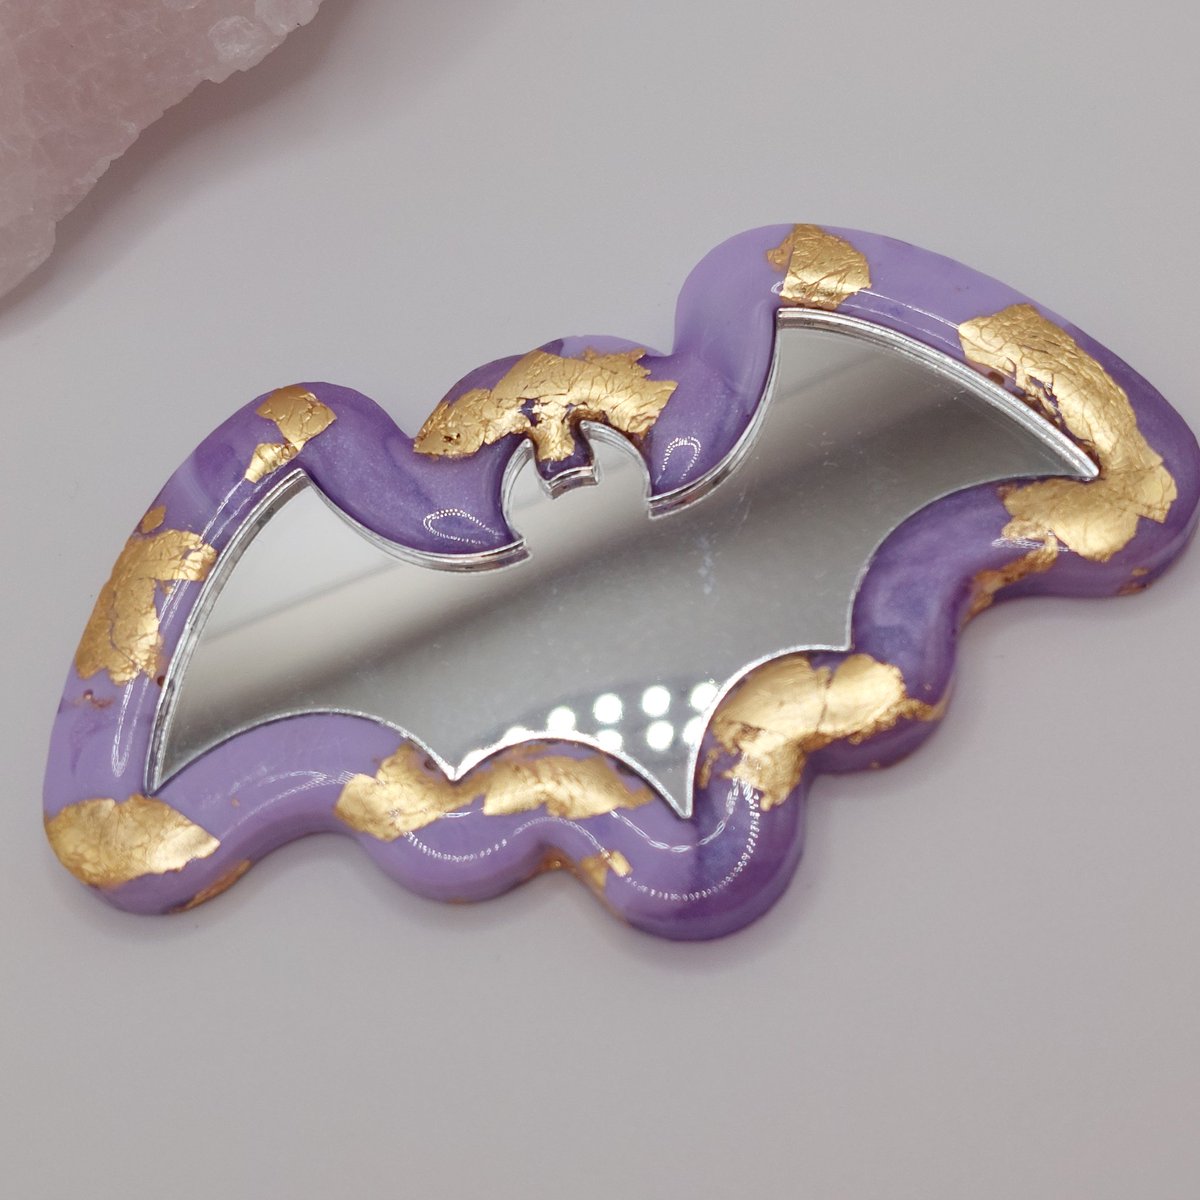 Wanted to get this bat mirror and a few other pieces listed onto @Etsy today, but sadly, you can not upload pictures when using their app! So slight change of plan, and I'm now sending all my photos to my laptop (which will take 4 times longer) #EtsySeller